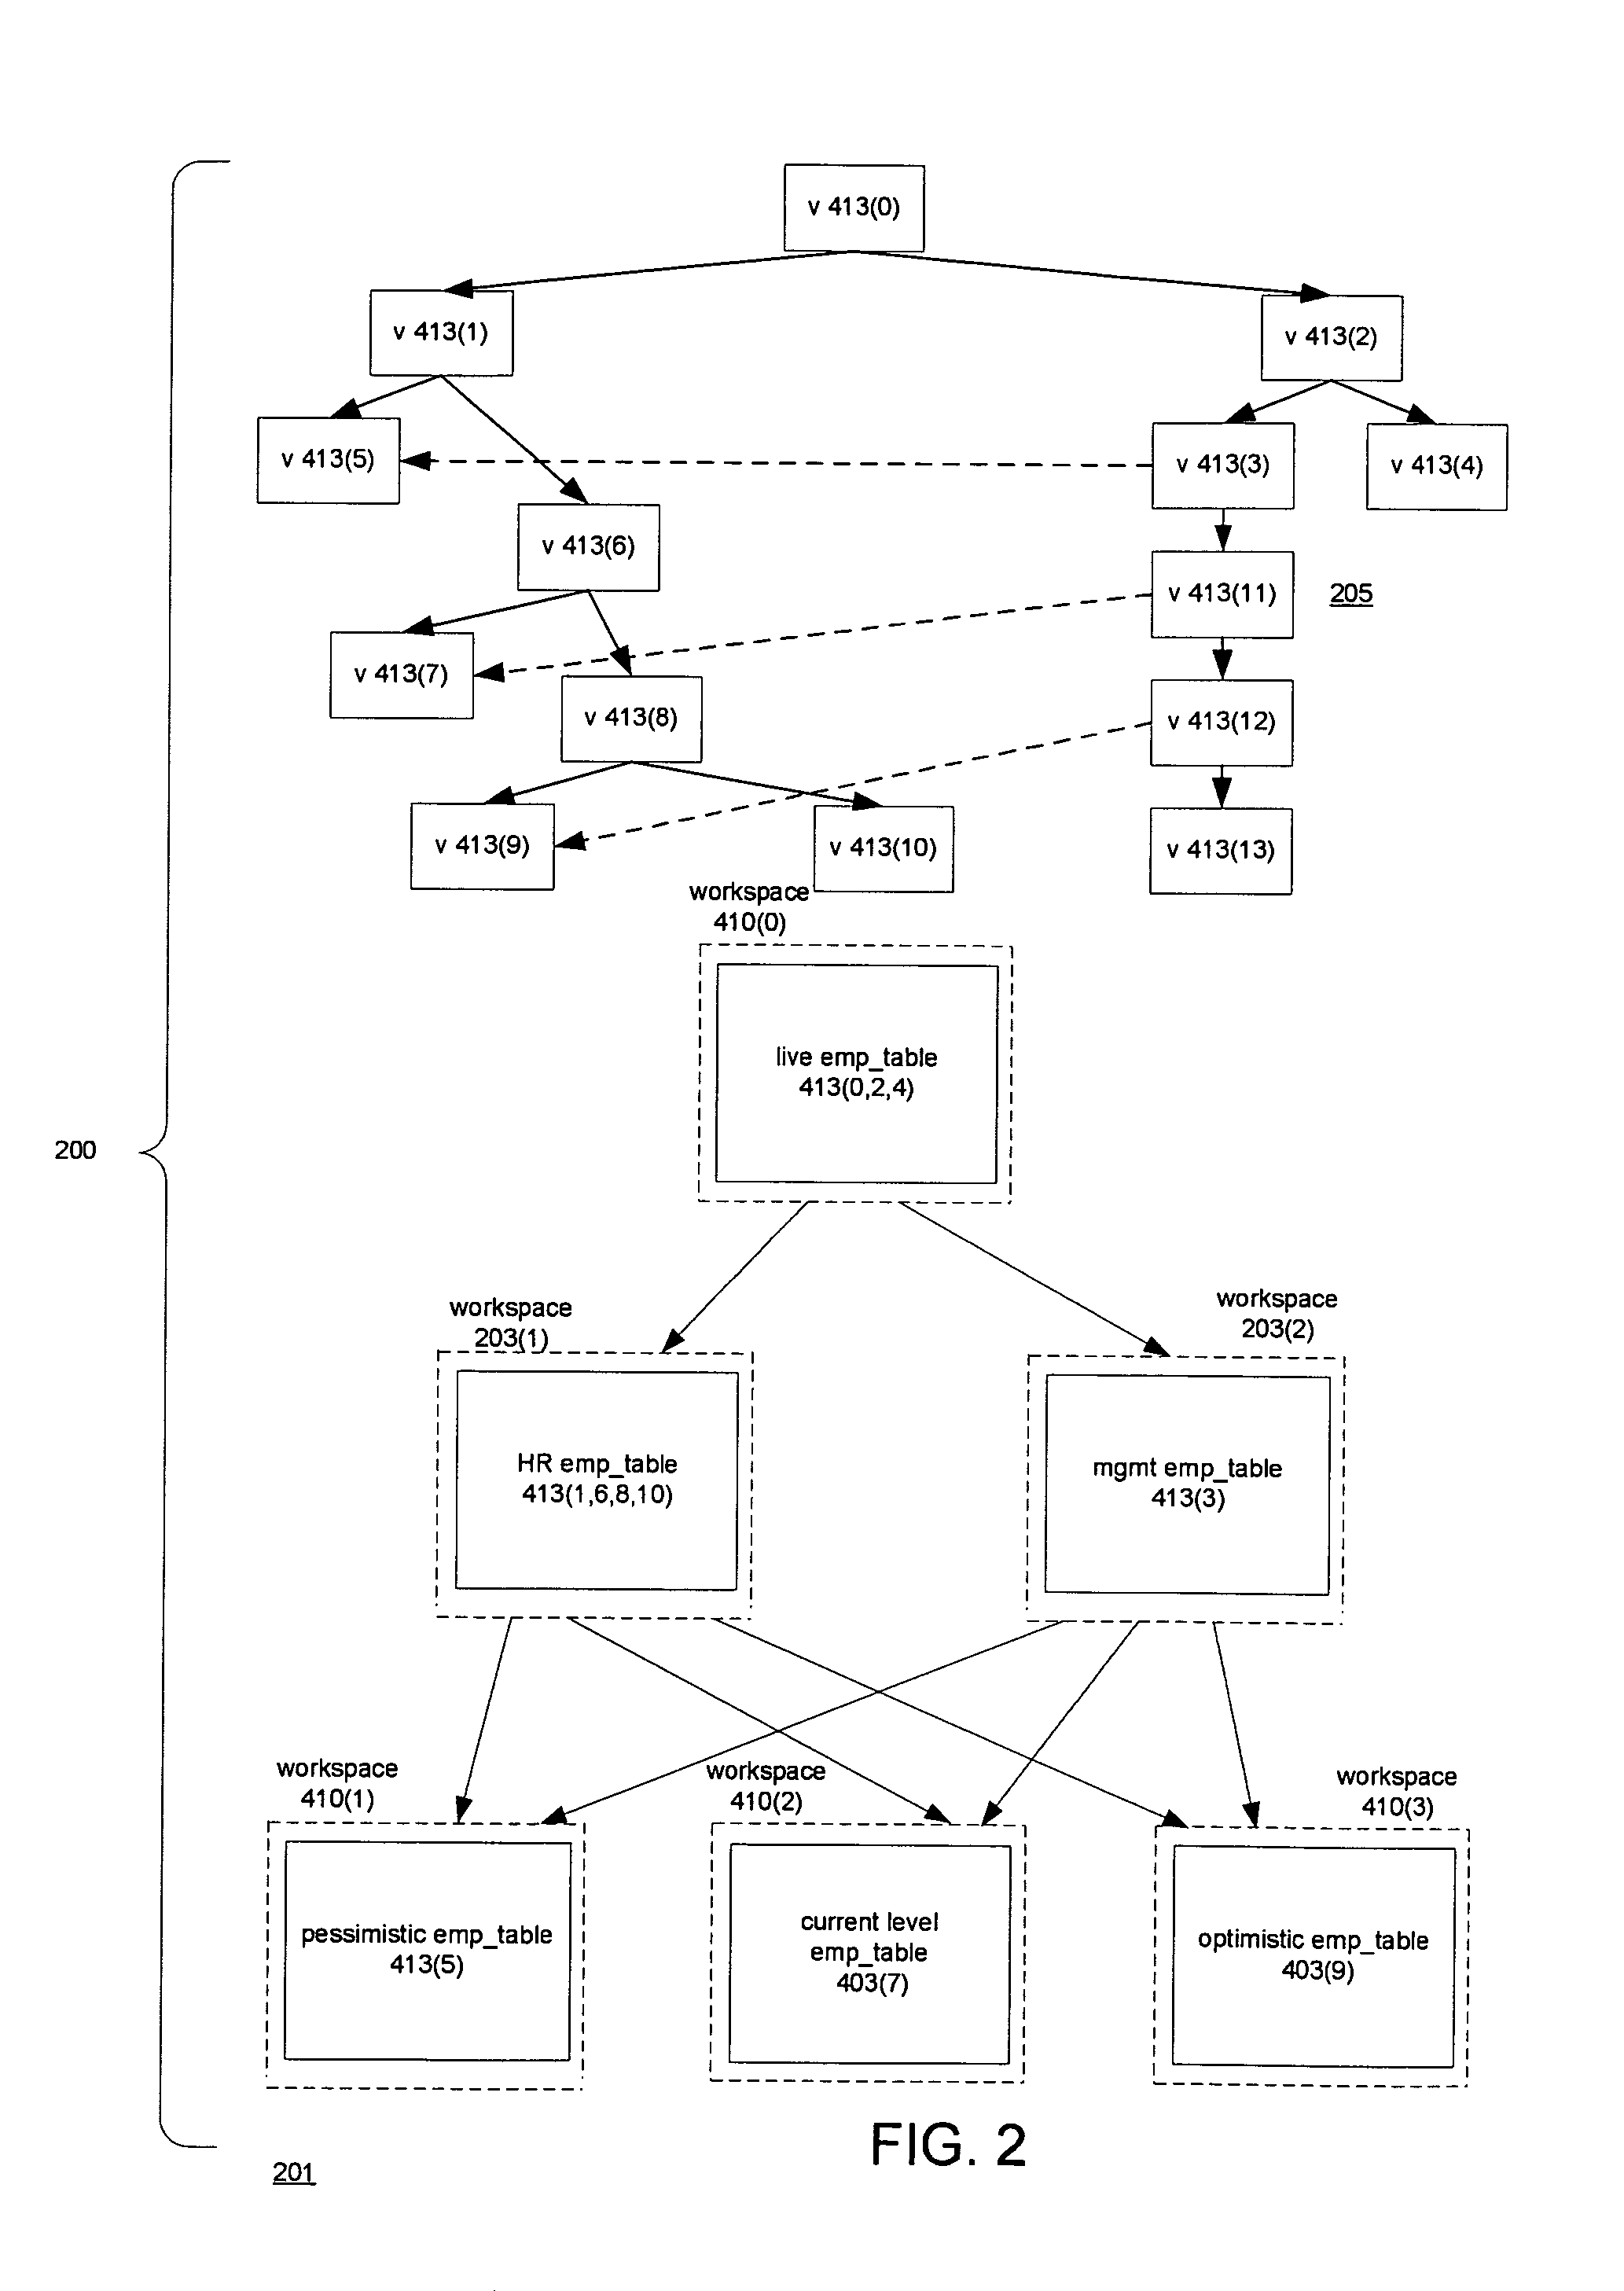 Versioned database system with multi-parent versions